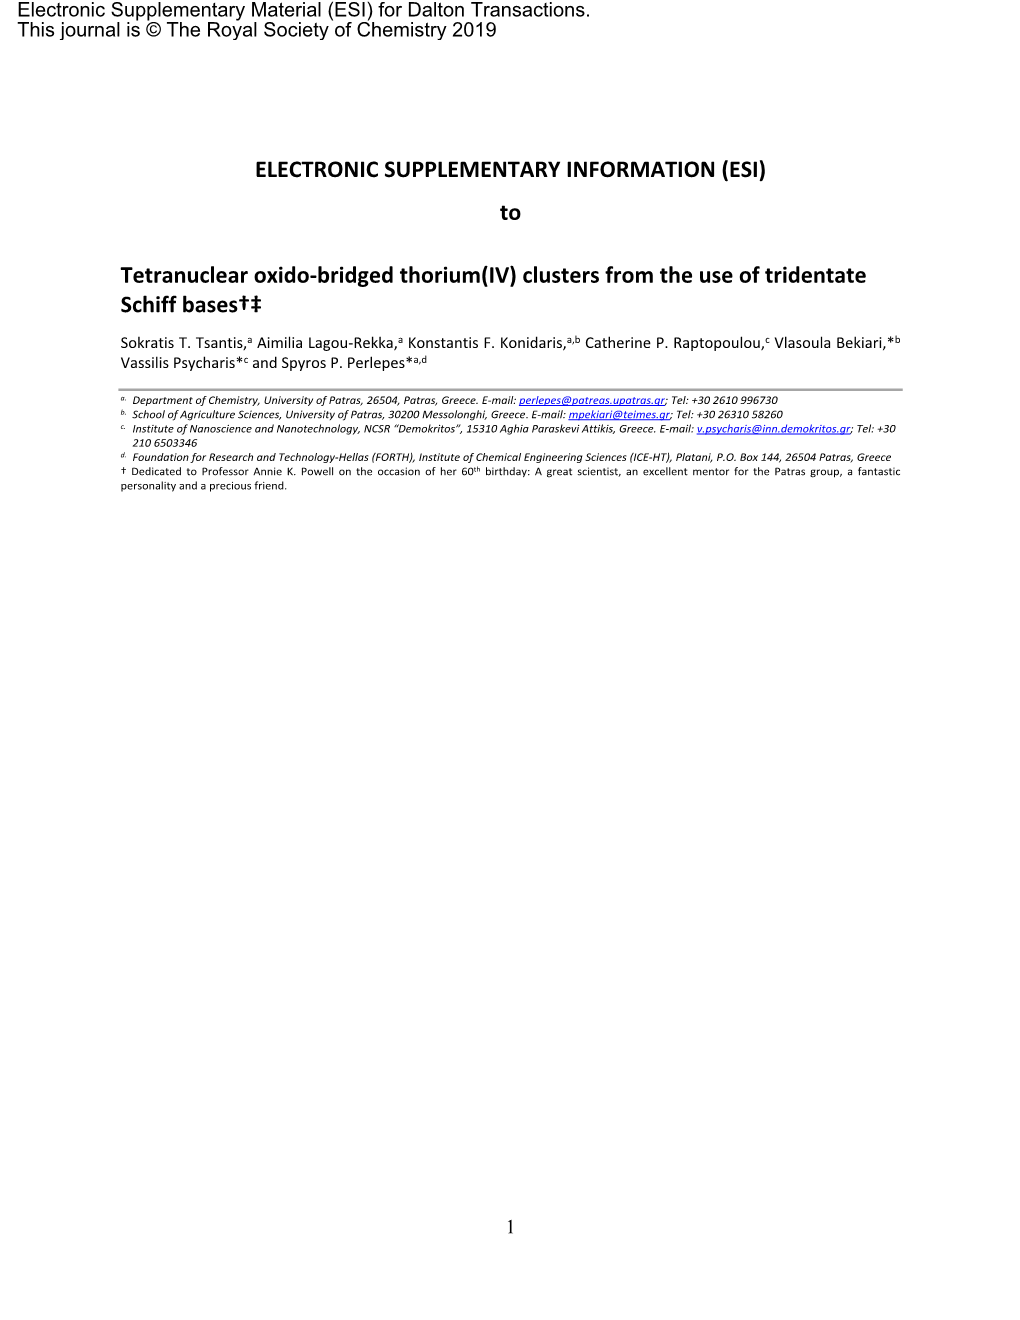 Electronic Supplementary Material (ESI) for Dalton Transactions